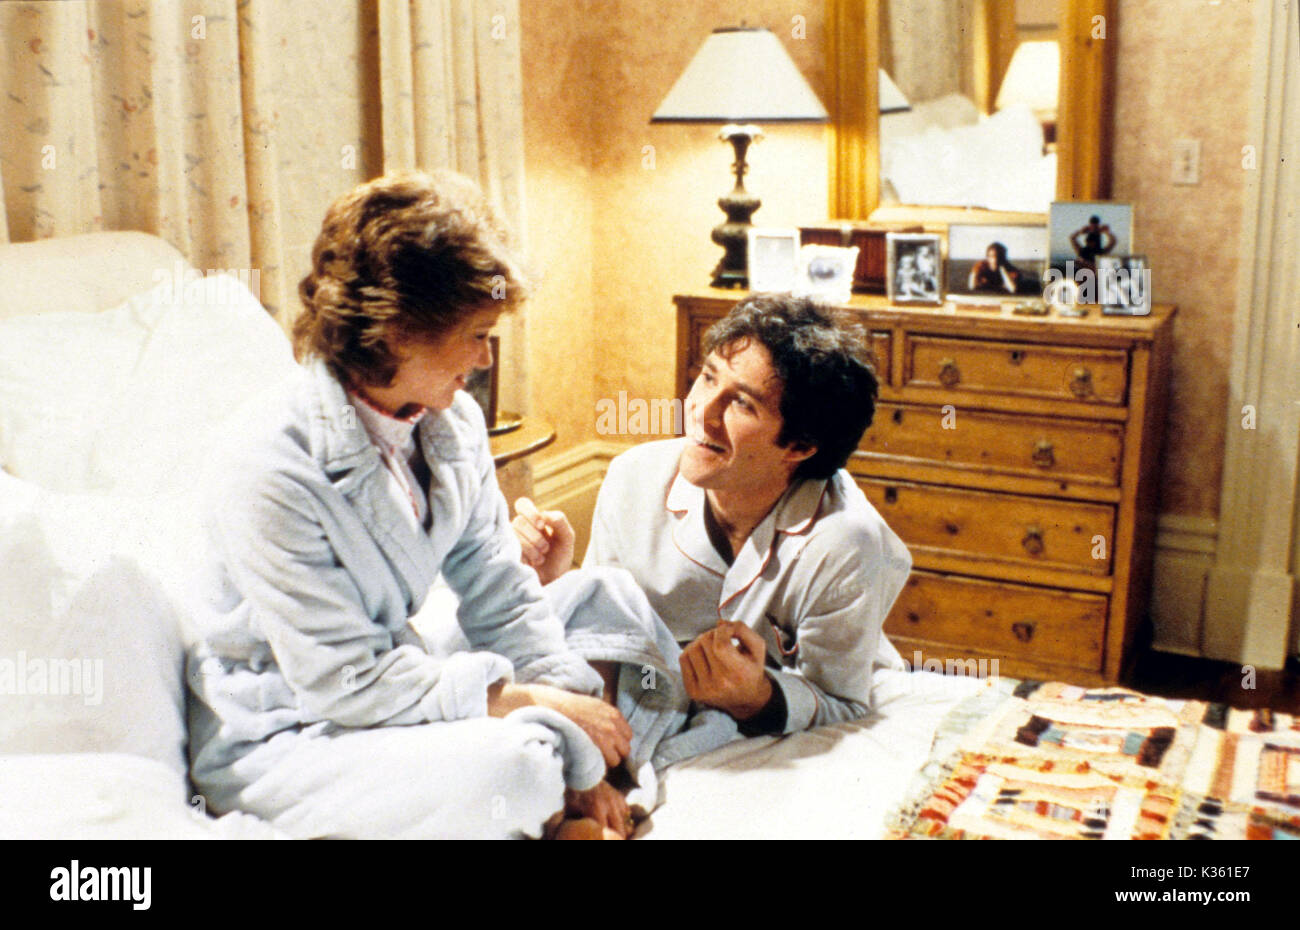 Die BIG CHILL Mary Kay Place, Kevin Kline Datum: 1983 Stockfoto